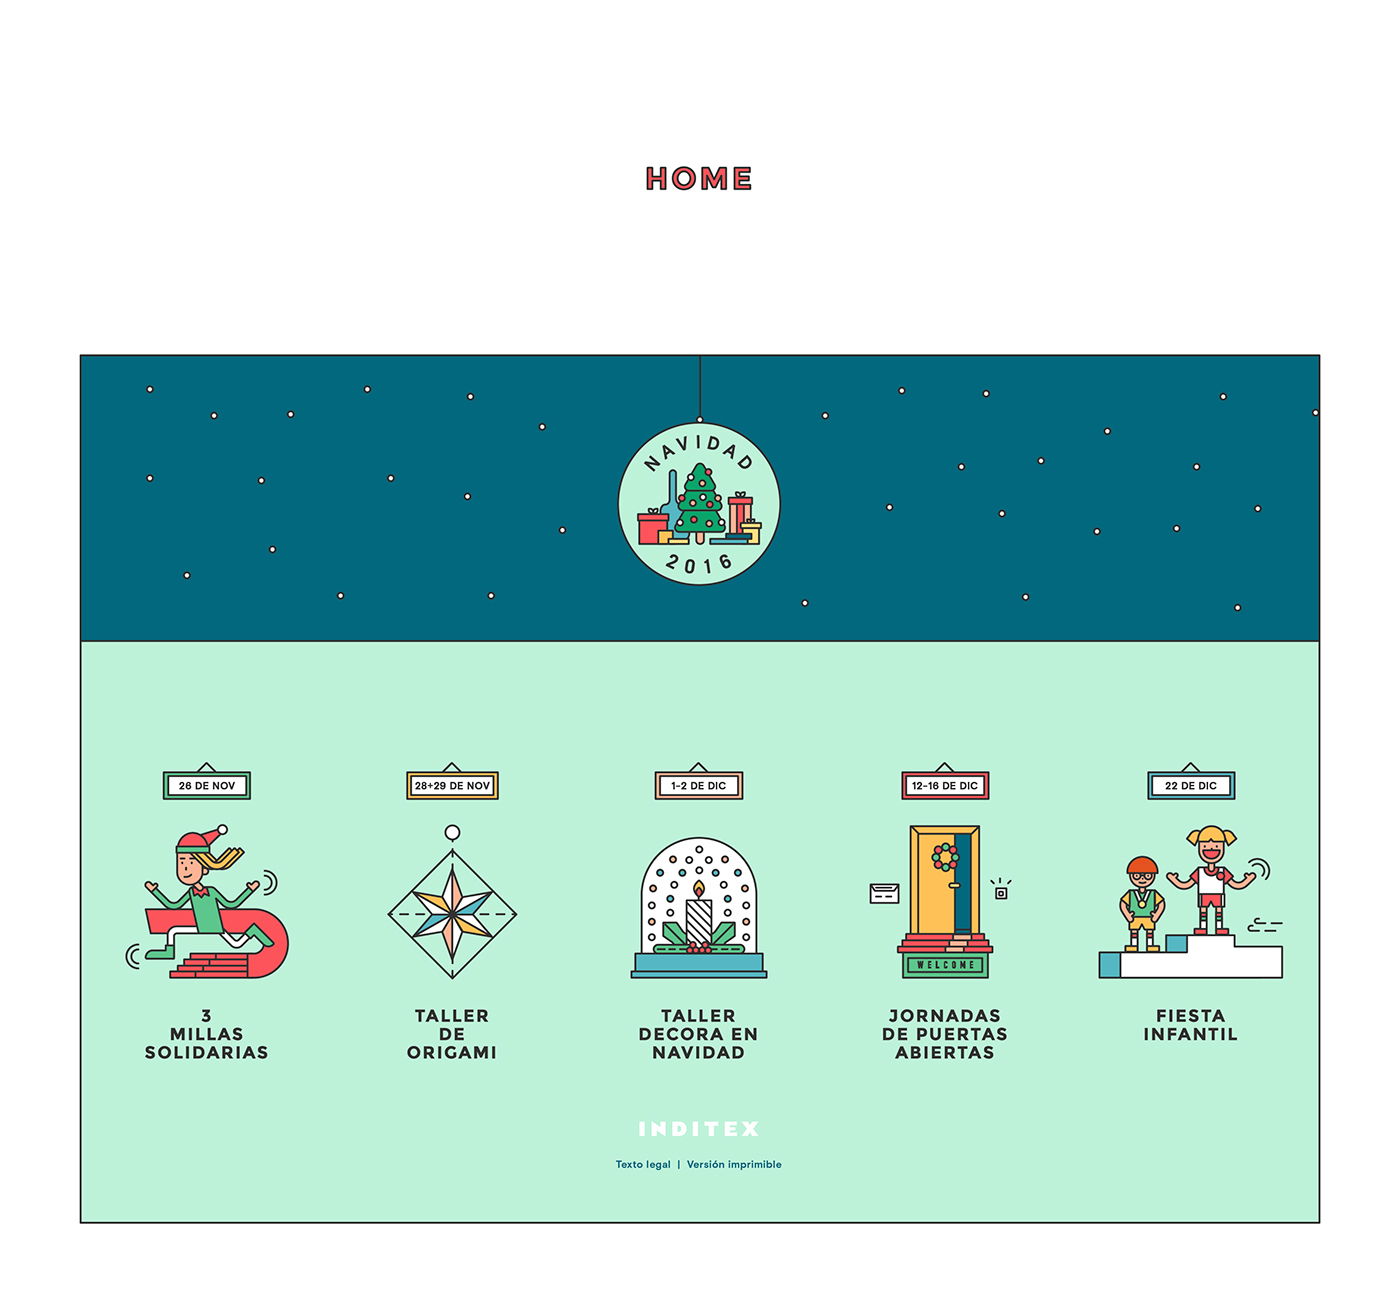 Web Design  ILLUSTRATION  inditex Christmas Christmas Campaign Olympic Games campaign2016